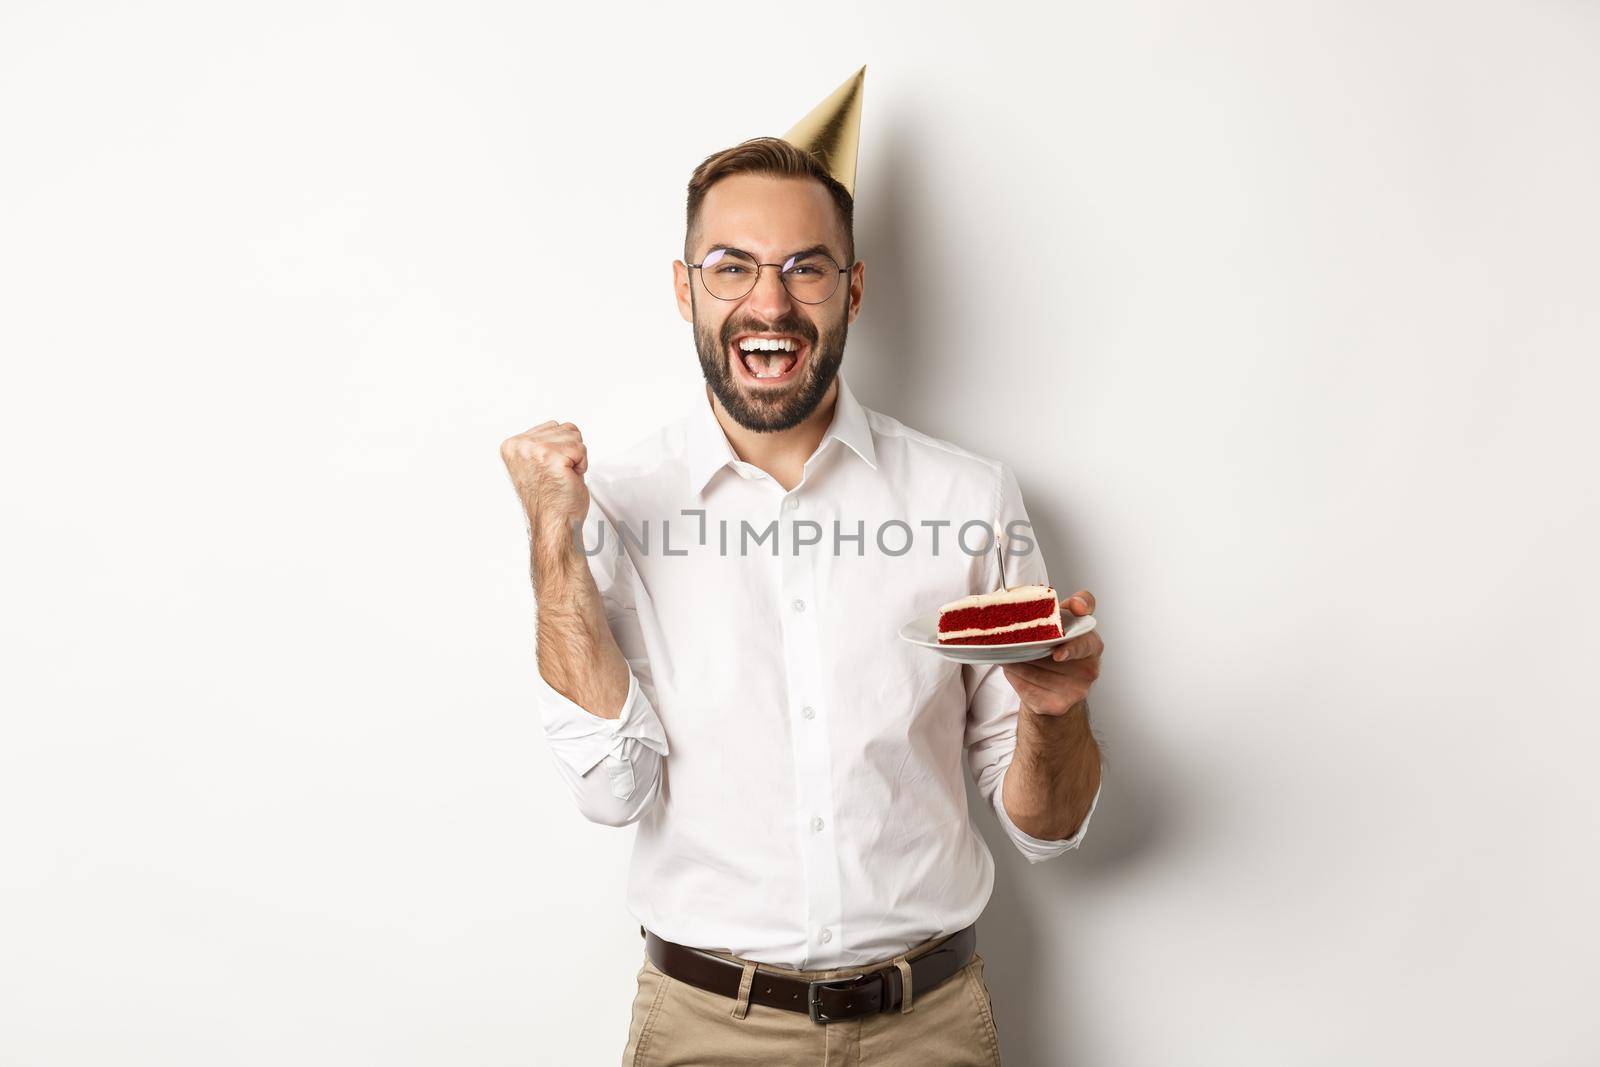 Holidays and celebration. Birthday guy making wish on bday cake and rejoicing, making fist pump sign as winning, achieve goal, white background.